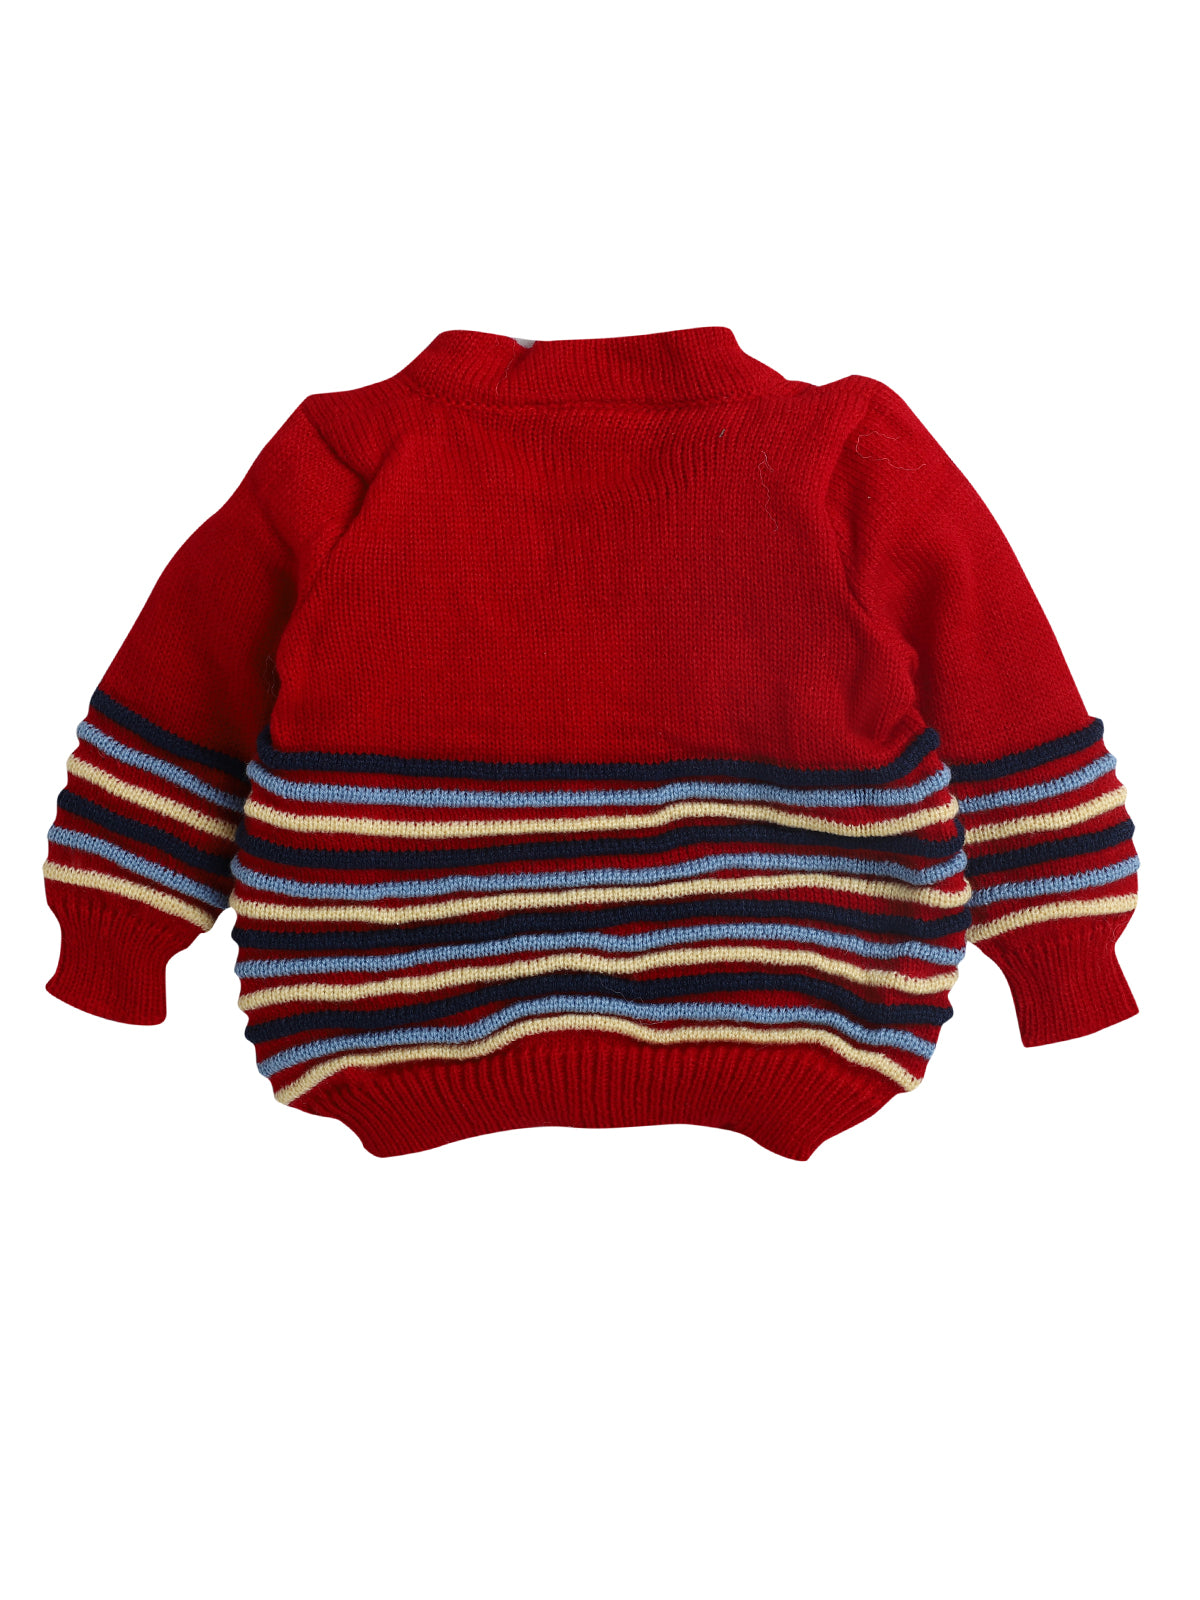 Red Color Stripe Design V-neck Sweater with matching caps and socks